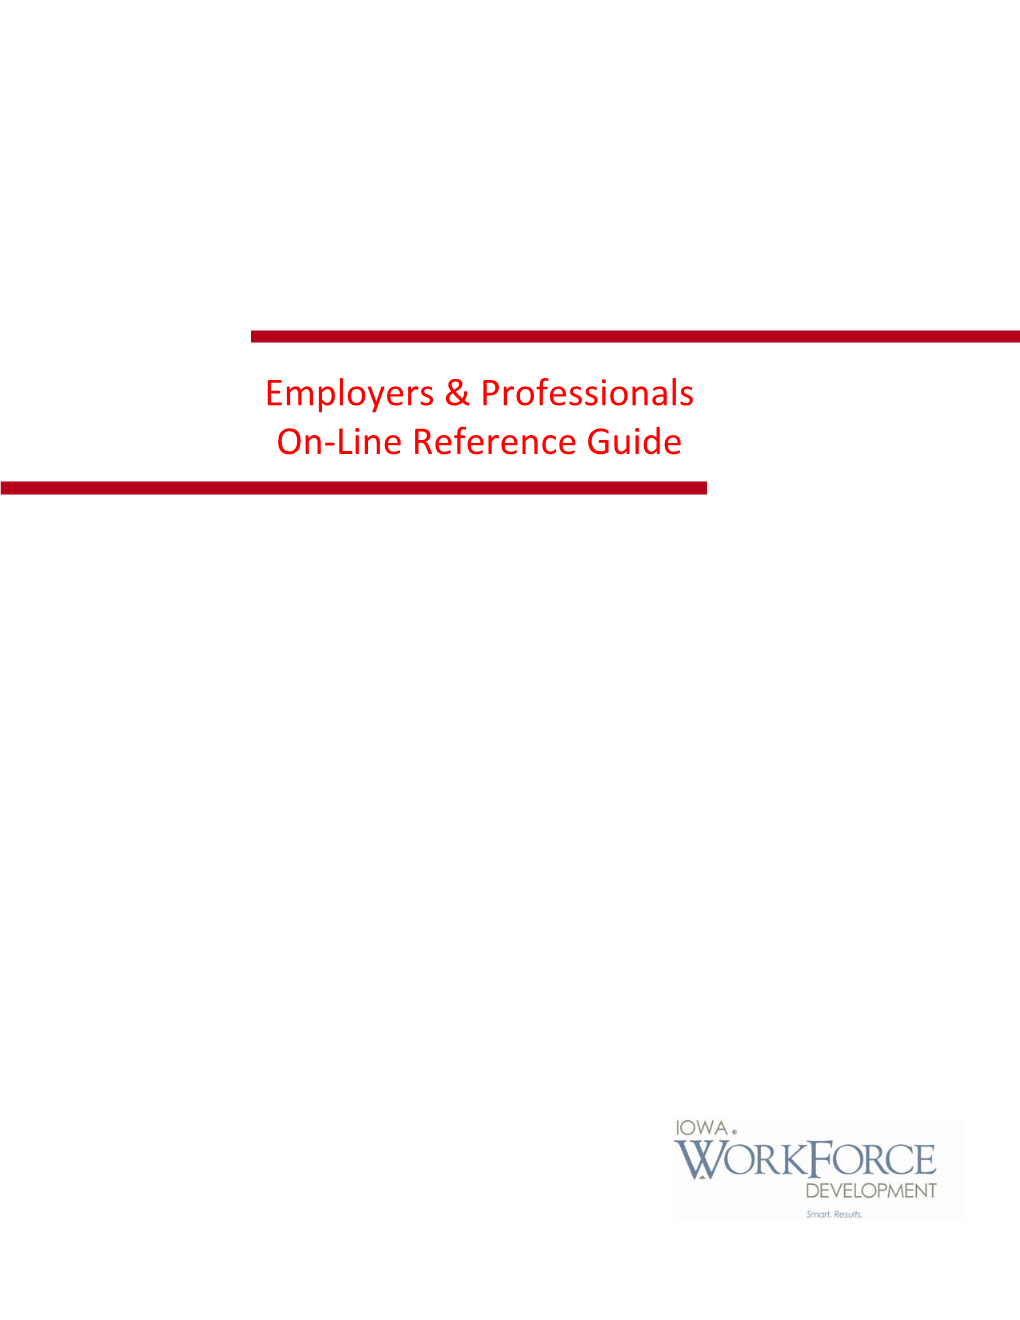 2017 Employers & Professionals On-Line Reference Guide